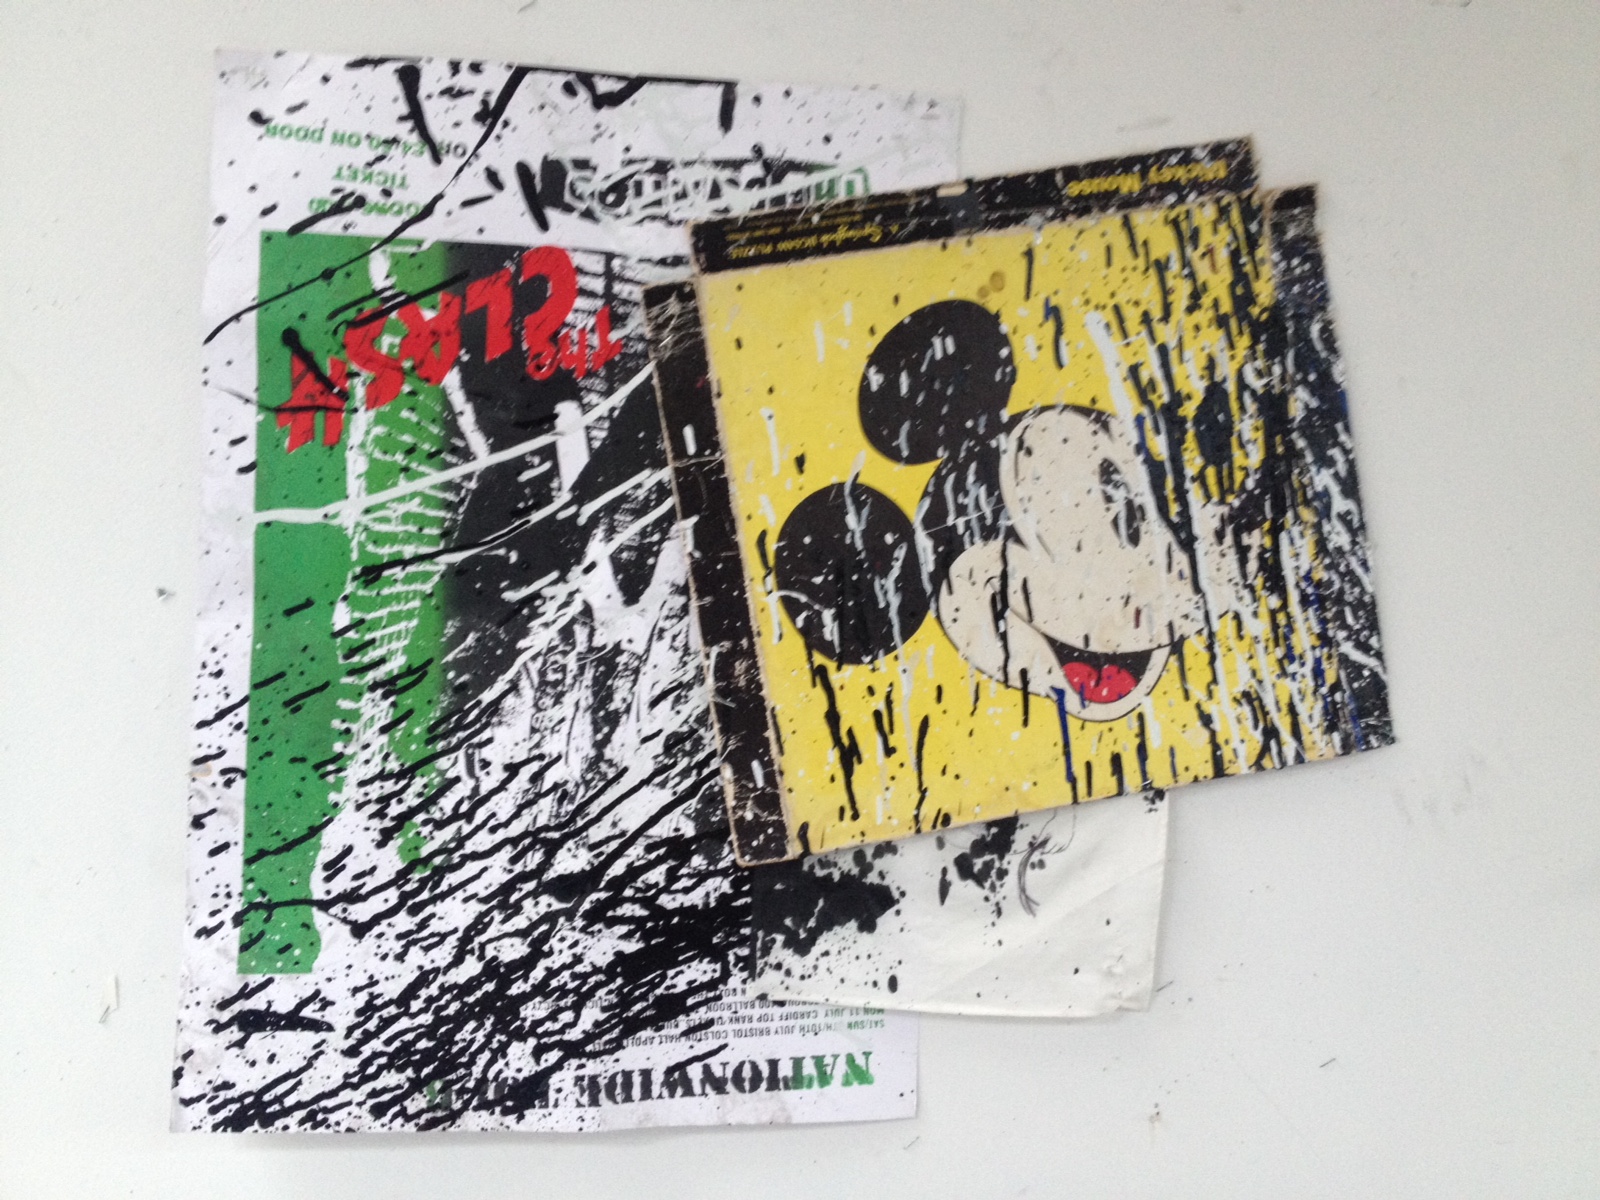 Photograph of two images pasted together, one of a mouse cartoon and the other unintelligible under the black and white paint splatter.